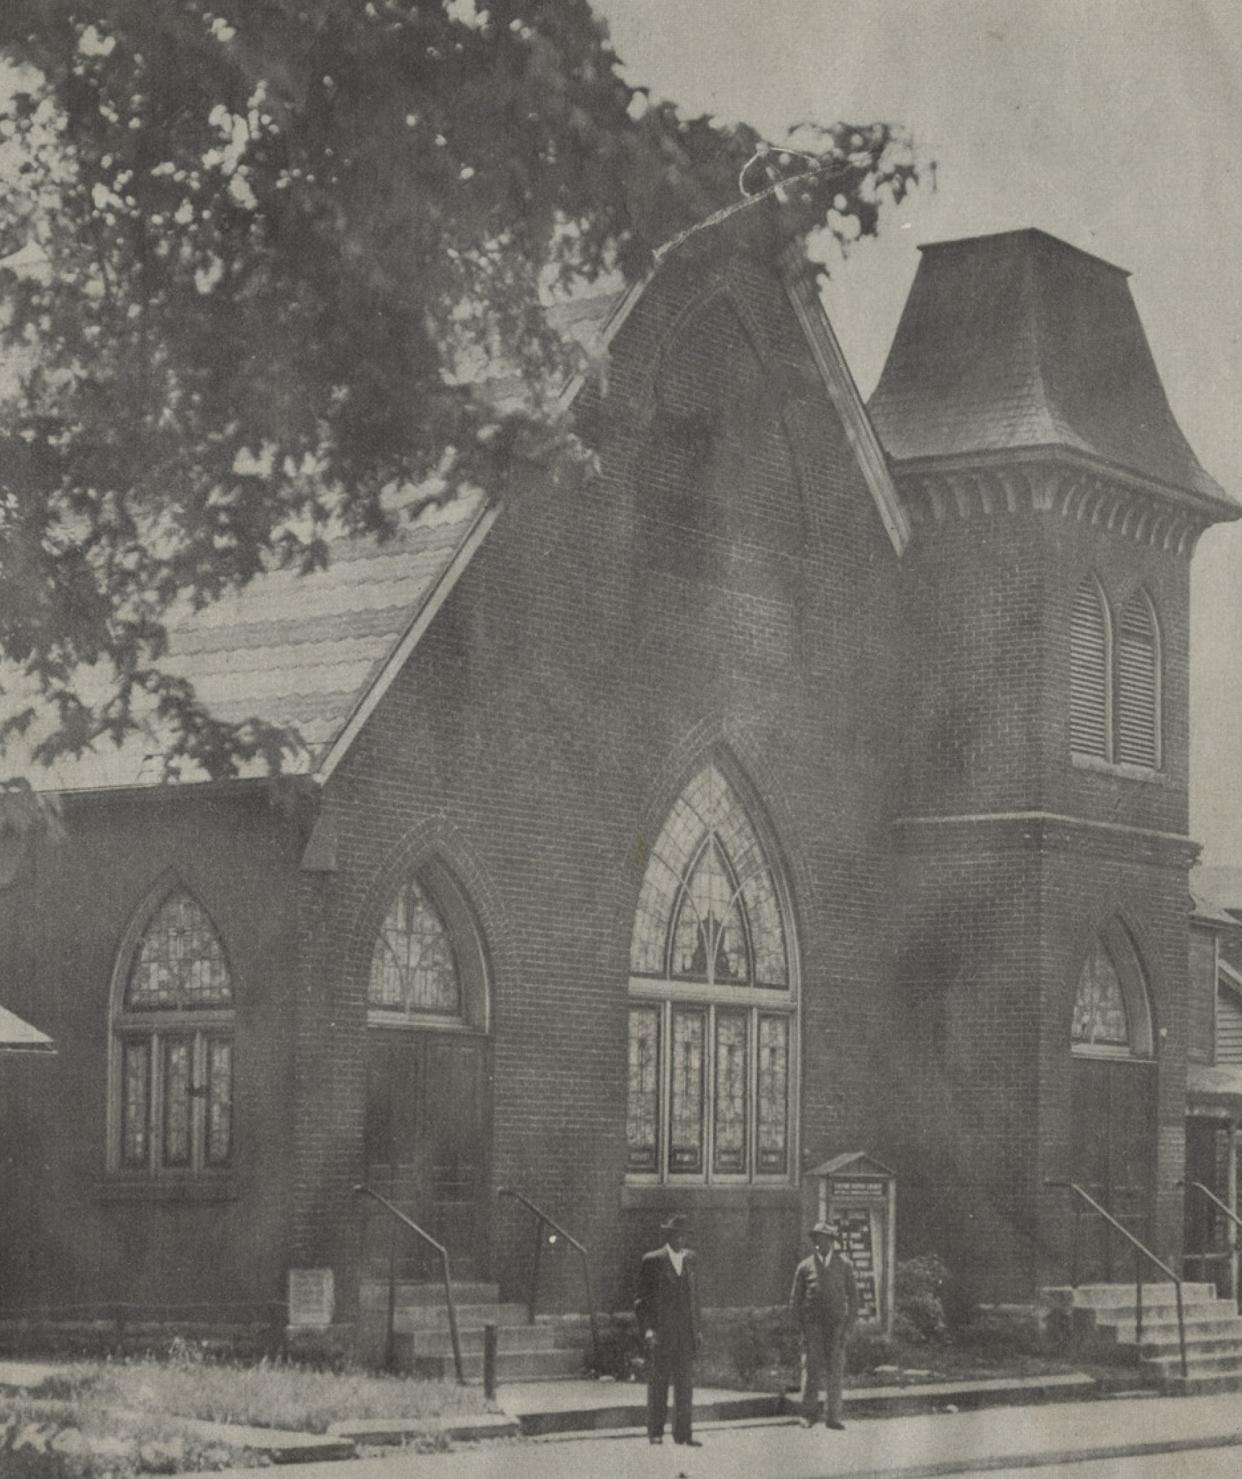 Muncie's Second (Calvary) Baptist Church was established in 1872 and pastored by John Broyles.